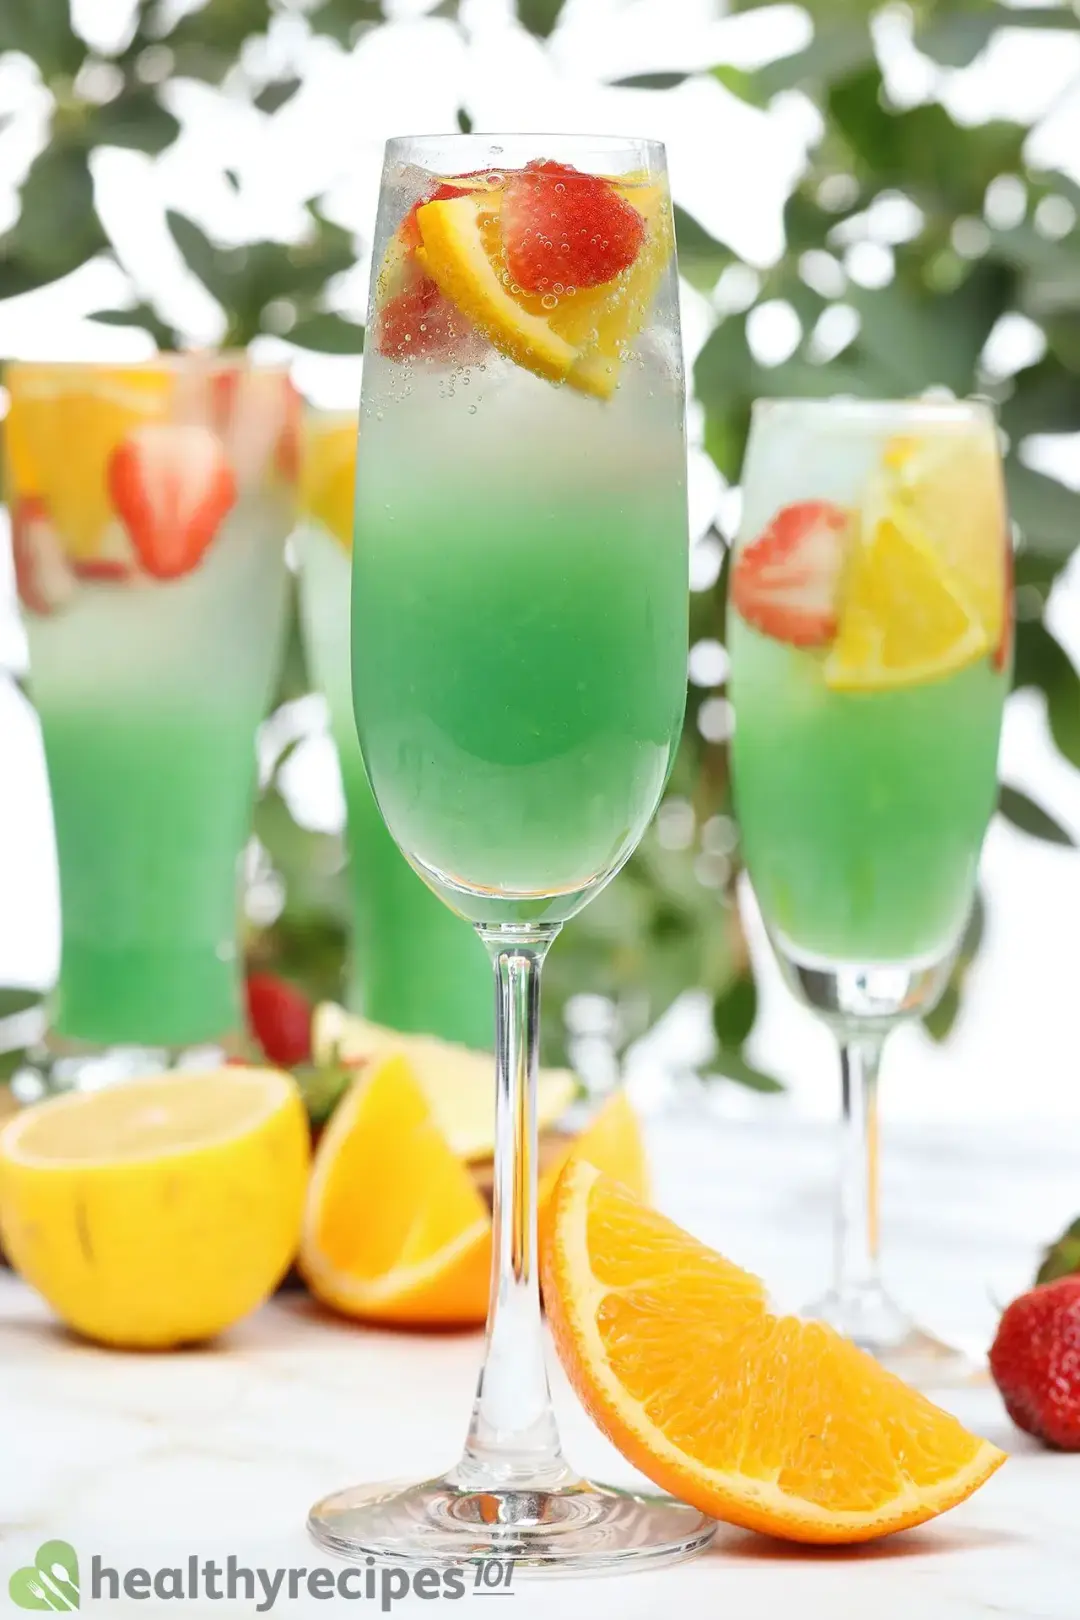 Multiple glasses of green jungle juice surrounded by lemon slices, orange slices, and strawberry slices